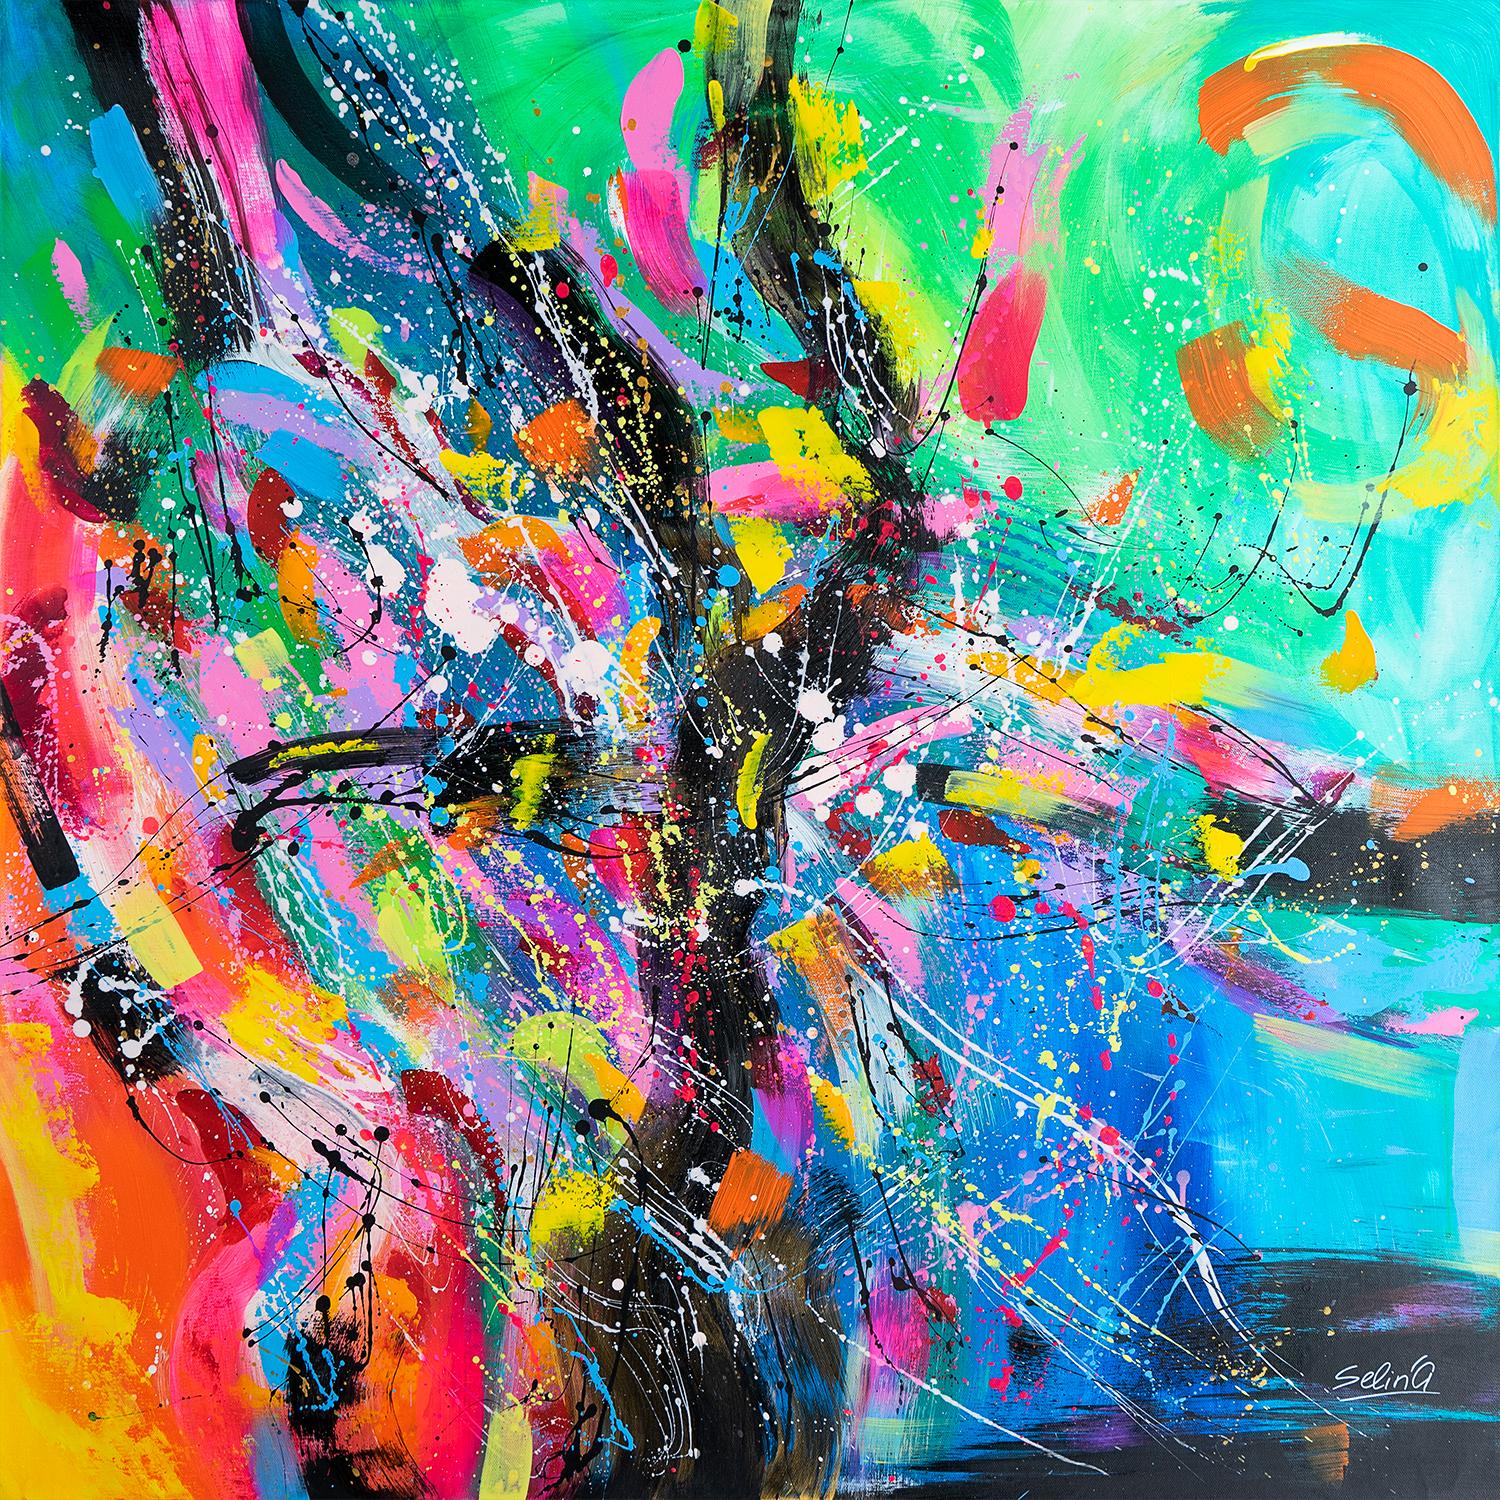 You are Universe, Modern Colorful Abstract Painting 90x90cm by Anna Selina